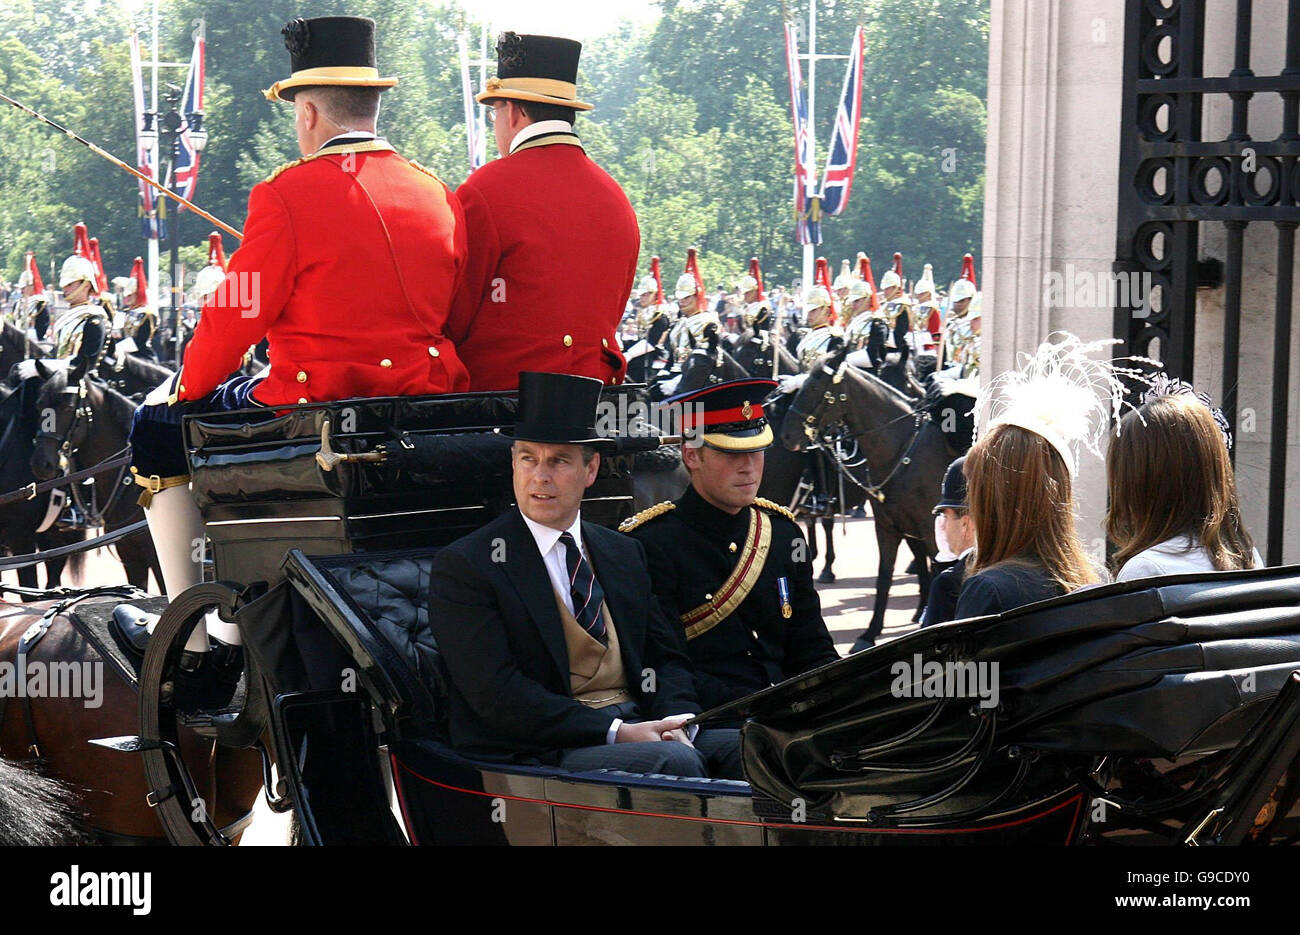 Prince Harry sits in a carriage with the Duke of York and his daughters Princess' Eugenie and Beatrice as they leave Buckingham Palace, London, to watch the annual Trooping the Colour ceremony as Britain's Queen Elizabeth II celebrates her official 80th birthday. PRESS ASSOCIATION Photo, Picture date: Saturday June 17, 2006. More than 1,100 soldiers will take part in the colourful annual display of pomp and pageantry. See PA story ROYAL Queen. Photo credit should read: Chris Young/WPA rota/PA. Stock Photo